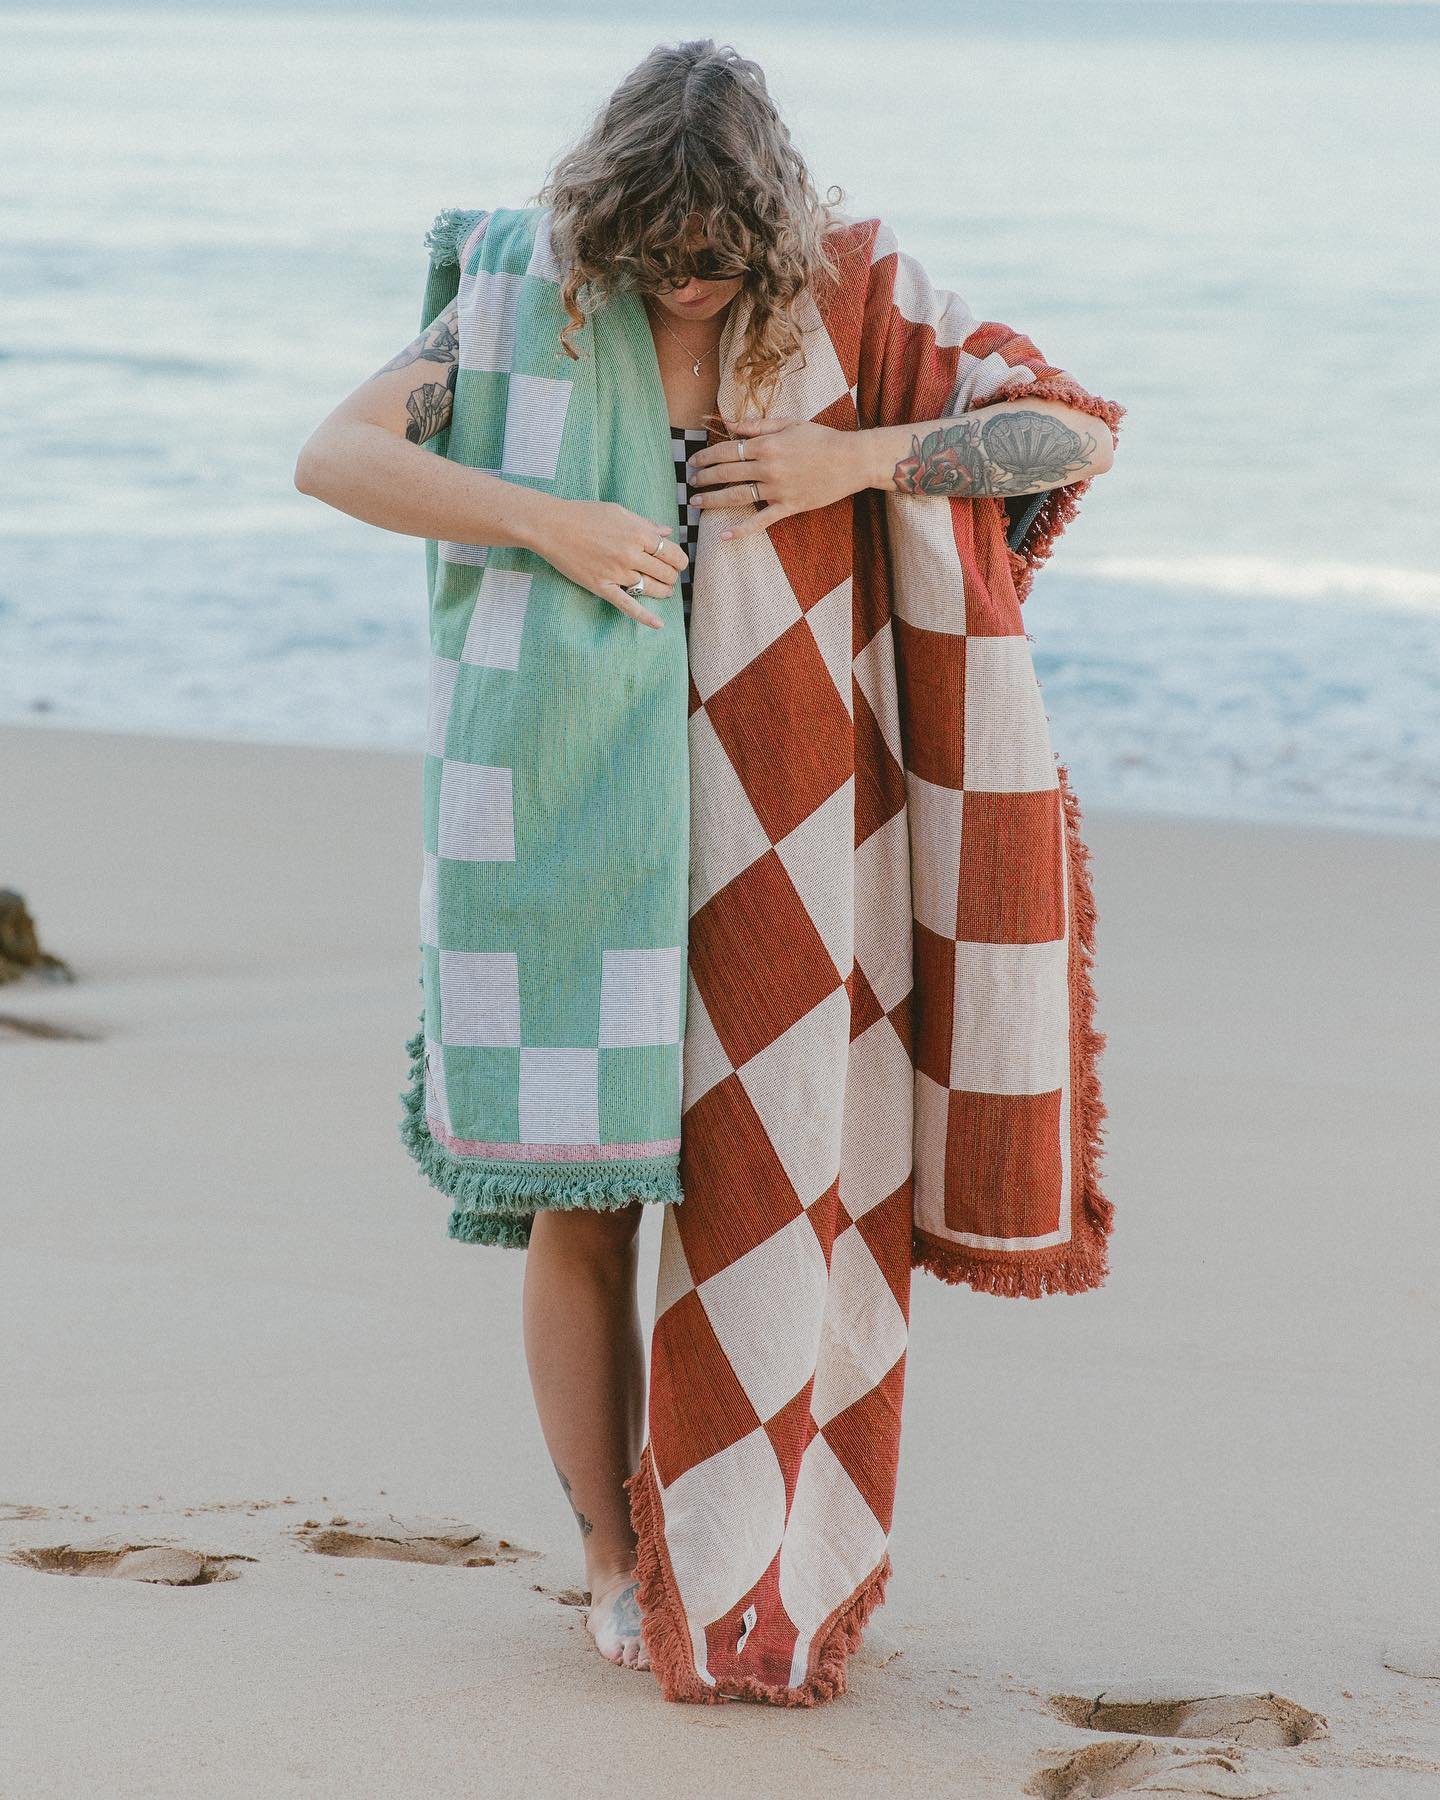 Here&rsquo;s a little sunny weekend treat! Use discount code SUMMERREADY at checkout for 10% off our recycled cotton blankets! For a limited time only! 🌞 🌞 

More gorgeous shots by @chloeaillud 🌊